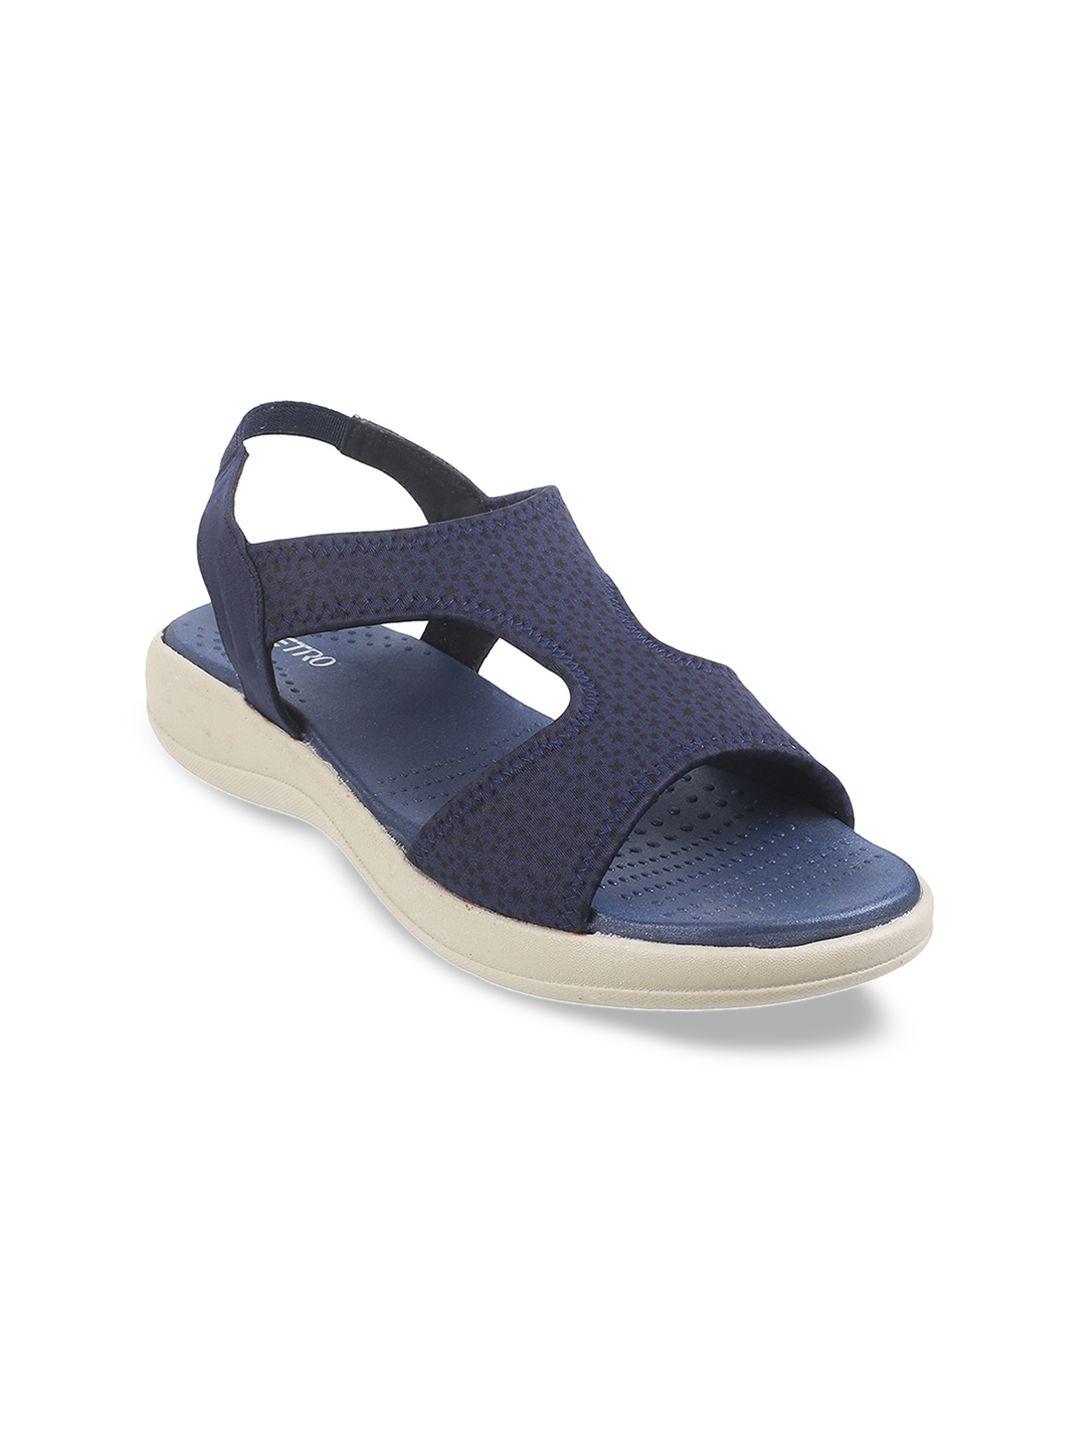 metro blue textured comfort sandals with laser cuts